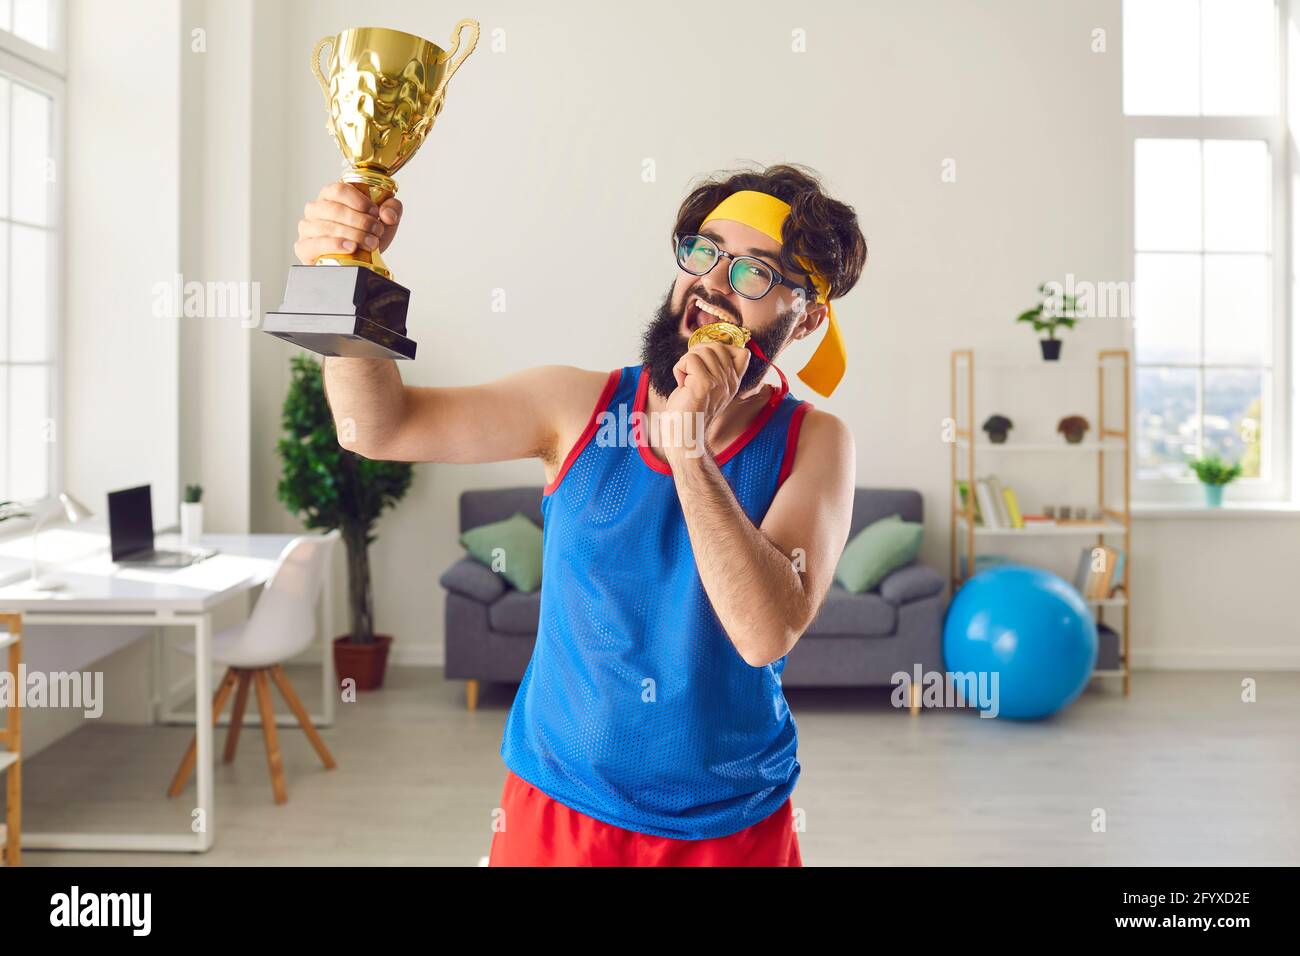 Happy funny man athlete biting golden medal and holding first prize trophy Stock Photo